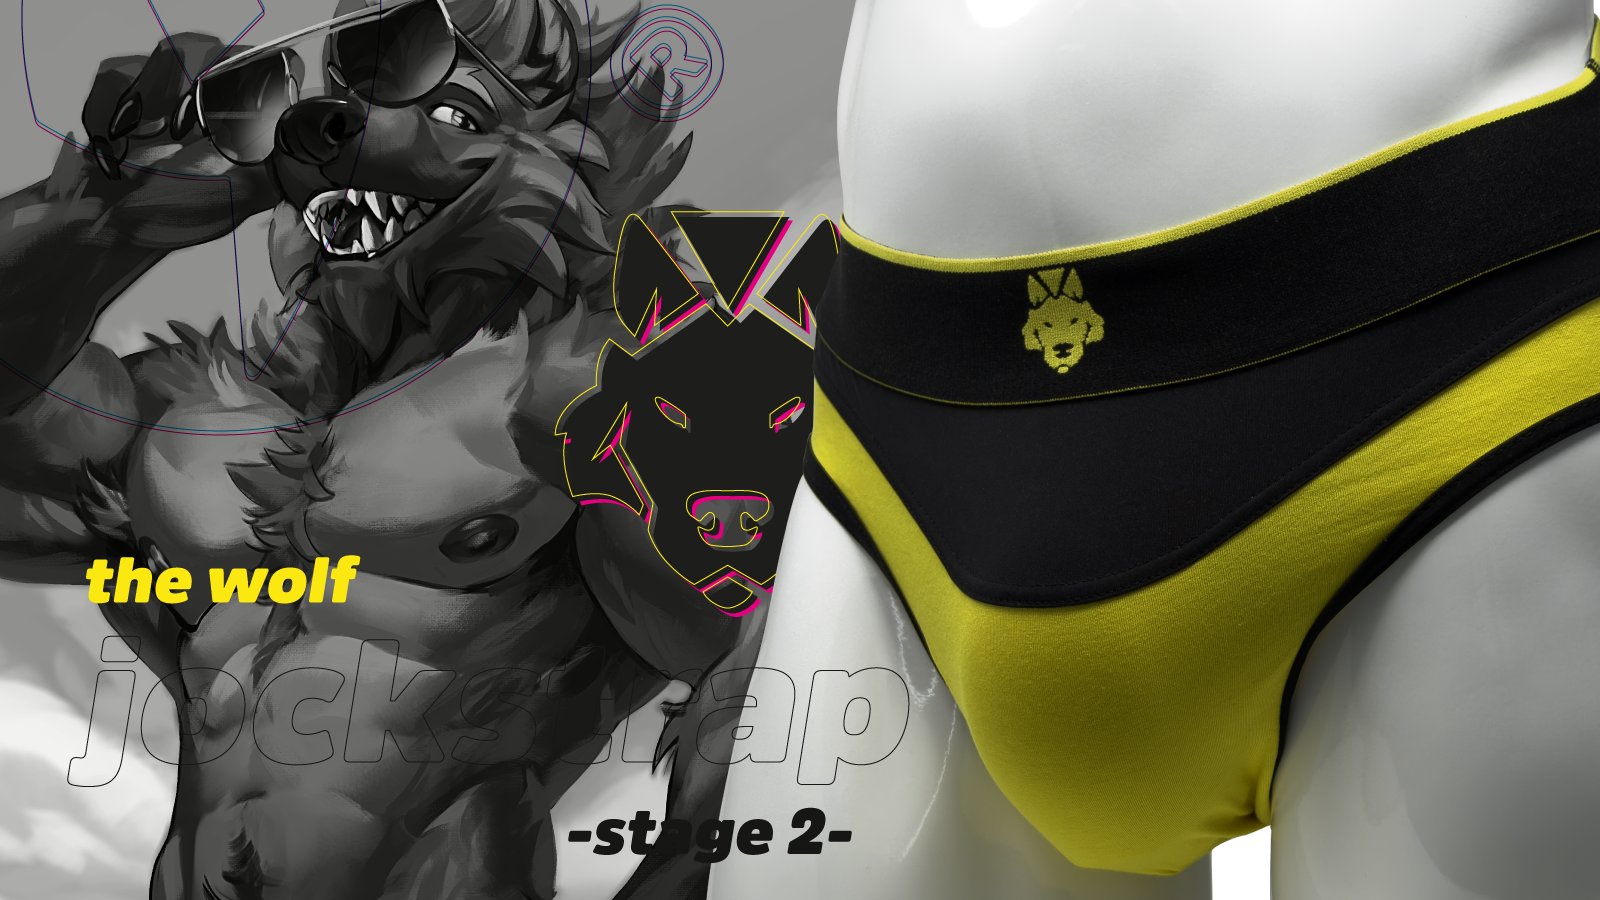 Rogue Fang - The Furry Underwear Brand 🐺🏳️‍🌈 on X: Happy New Year!  After a successful pre-order campaign, The Hunter Pack is now available!  We've had great feedback from those who already